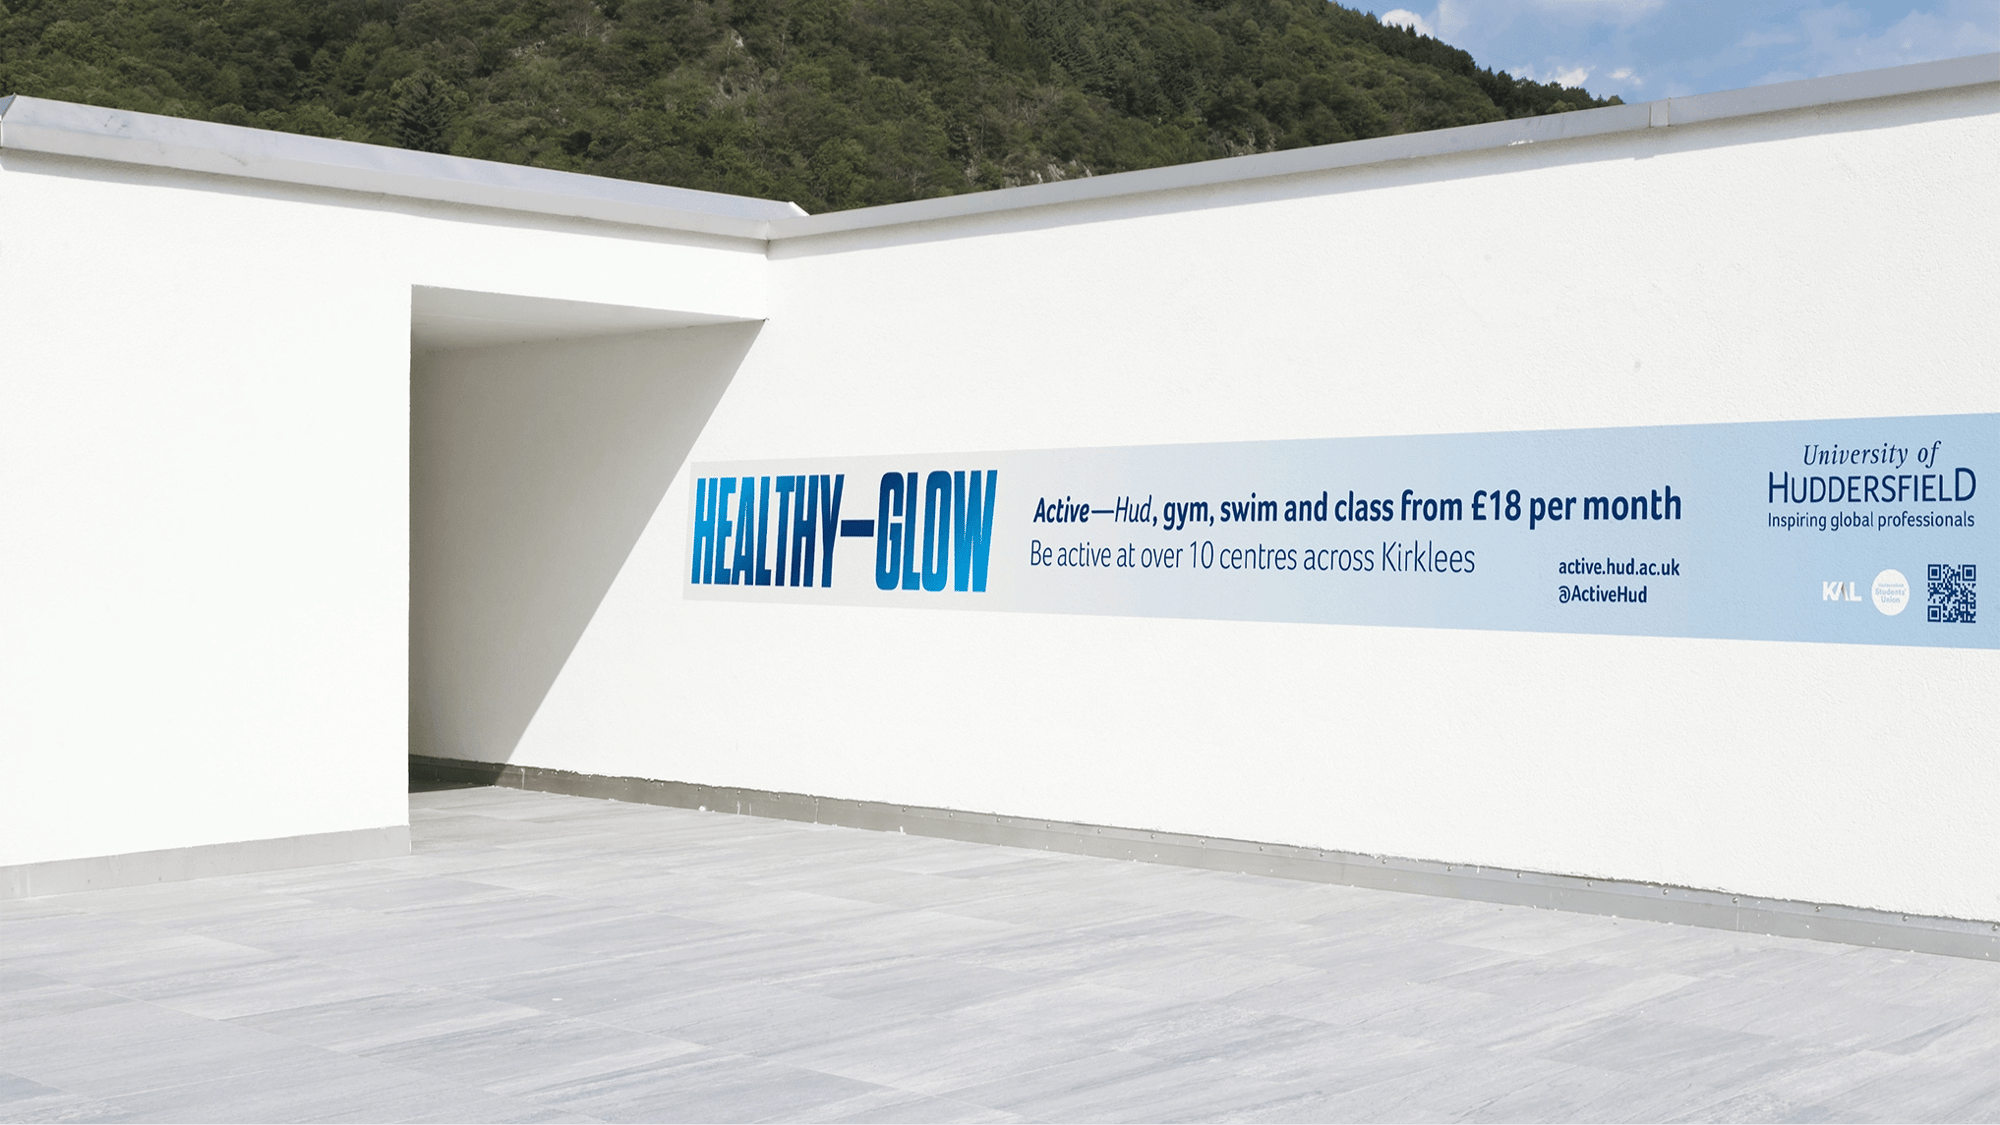 The new branding applied to a wall outside the university facilities.